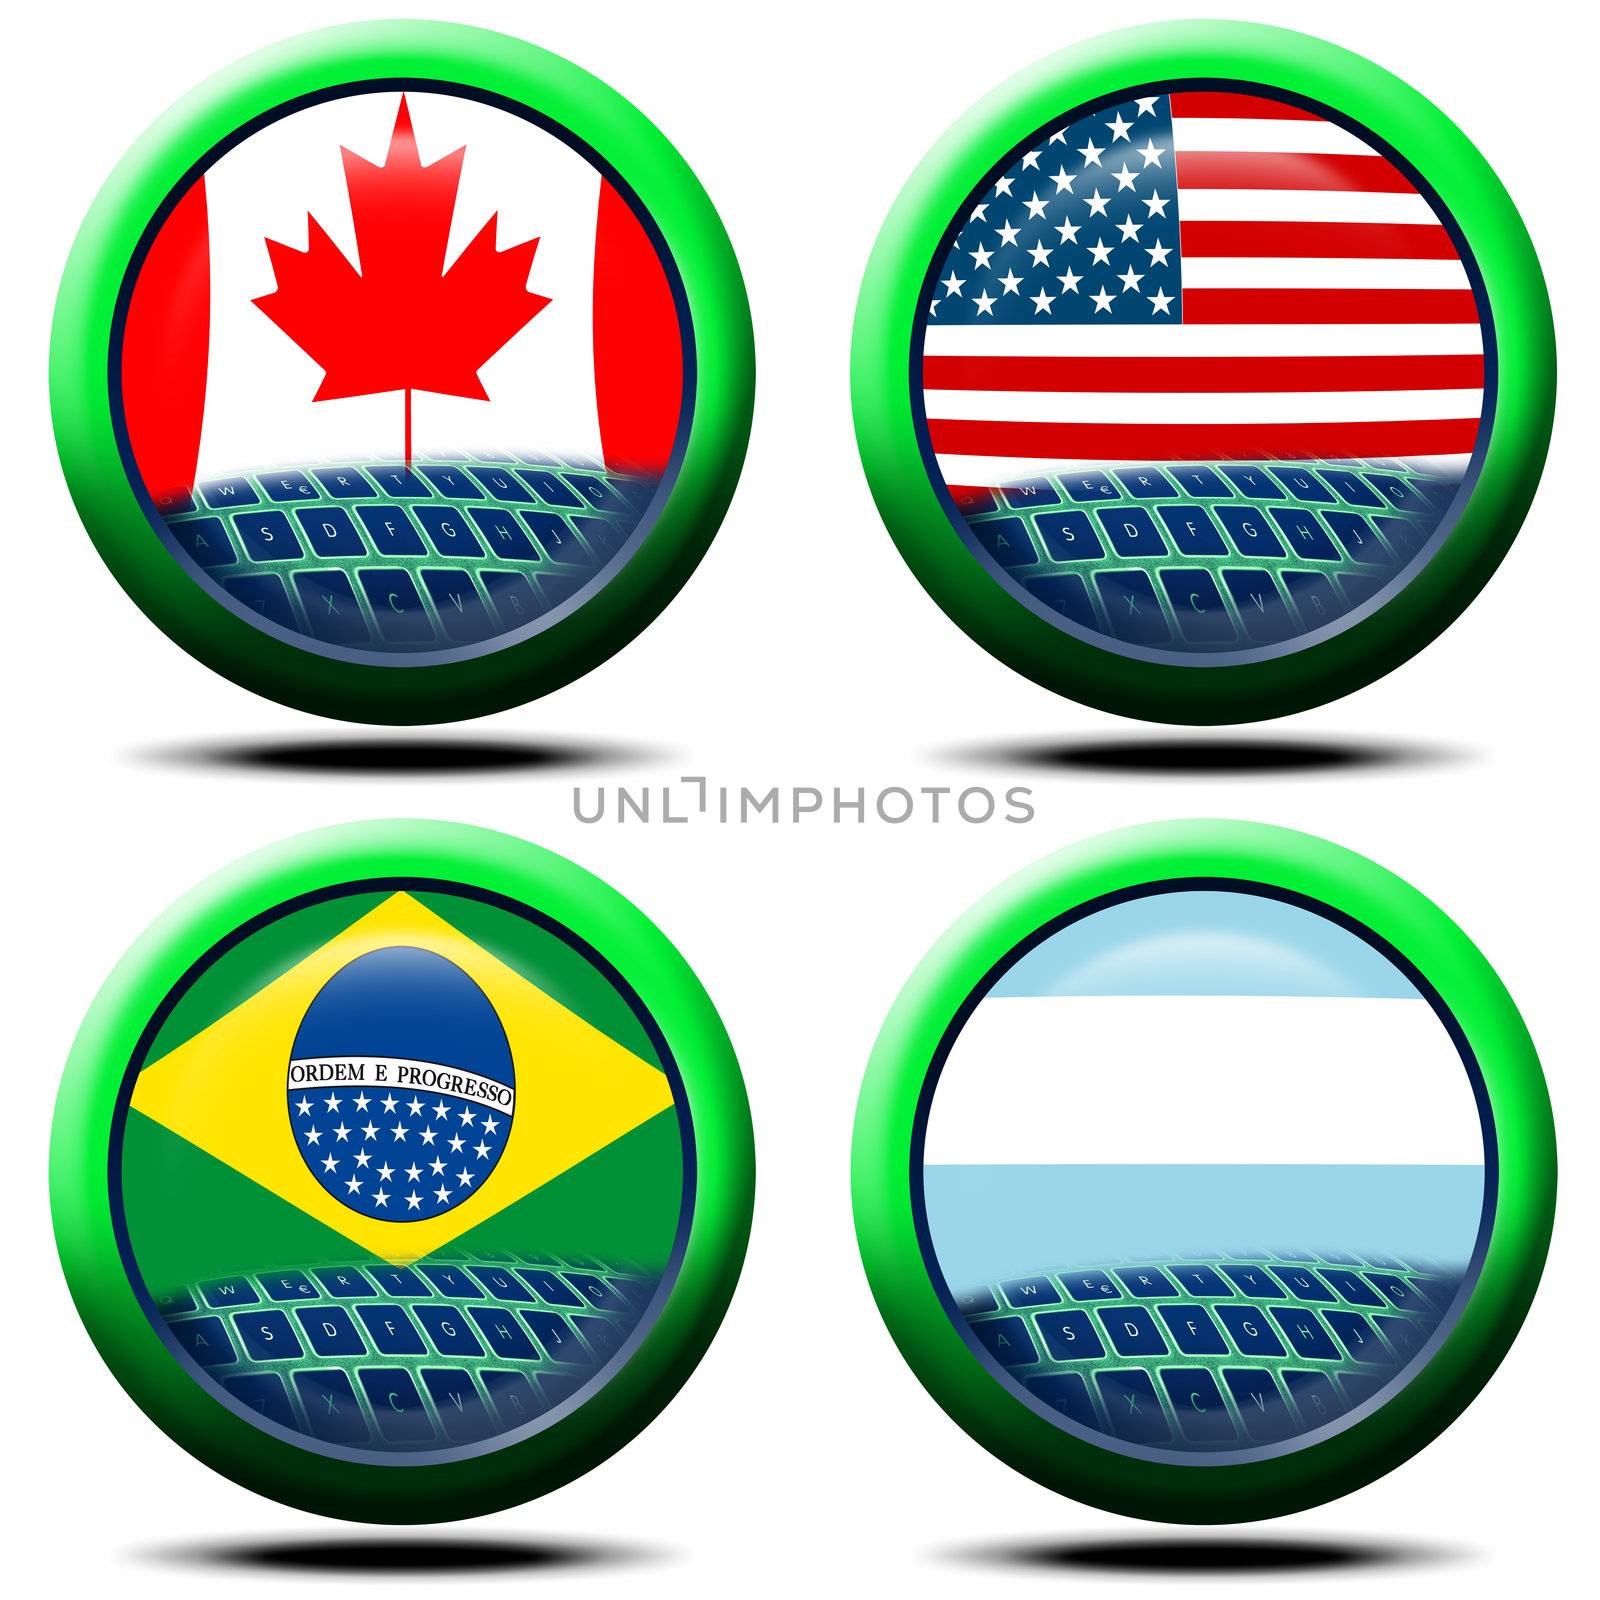 4 icons with the flag of Canada, USA, Brazil, Argentina